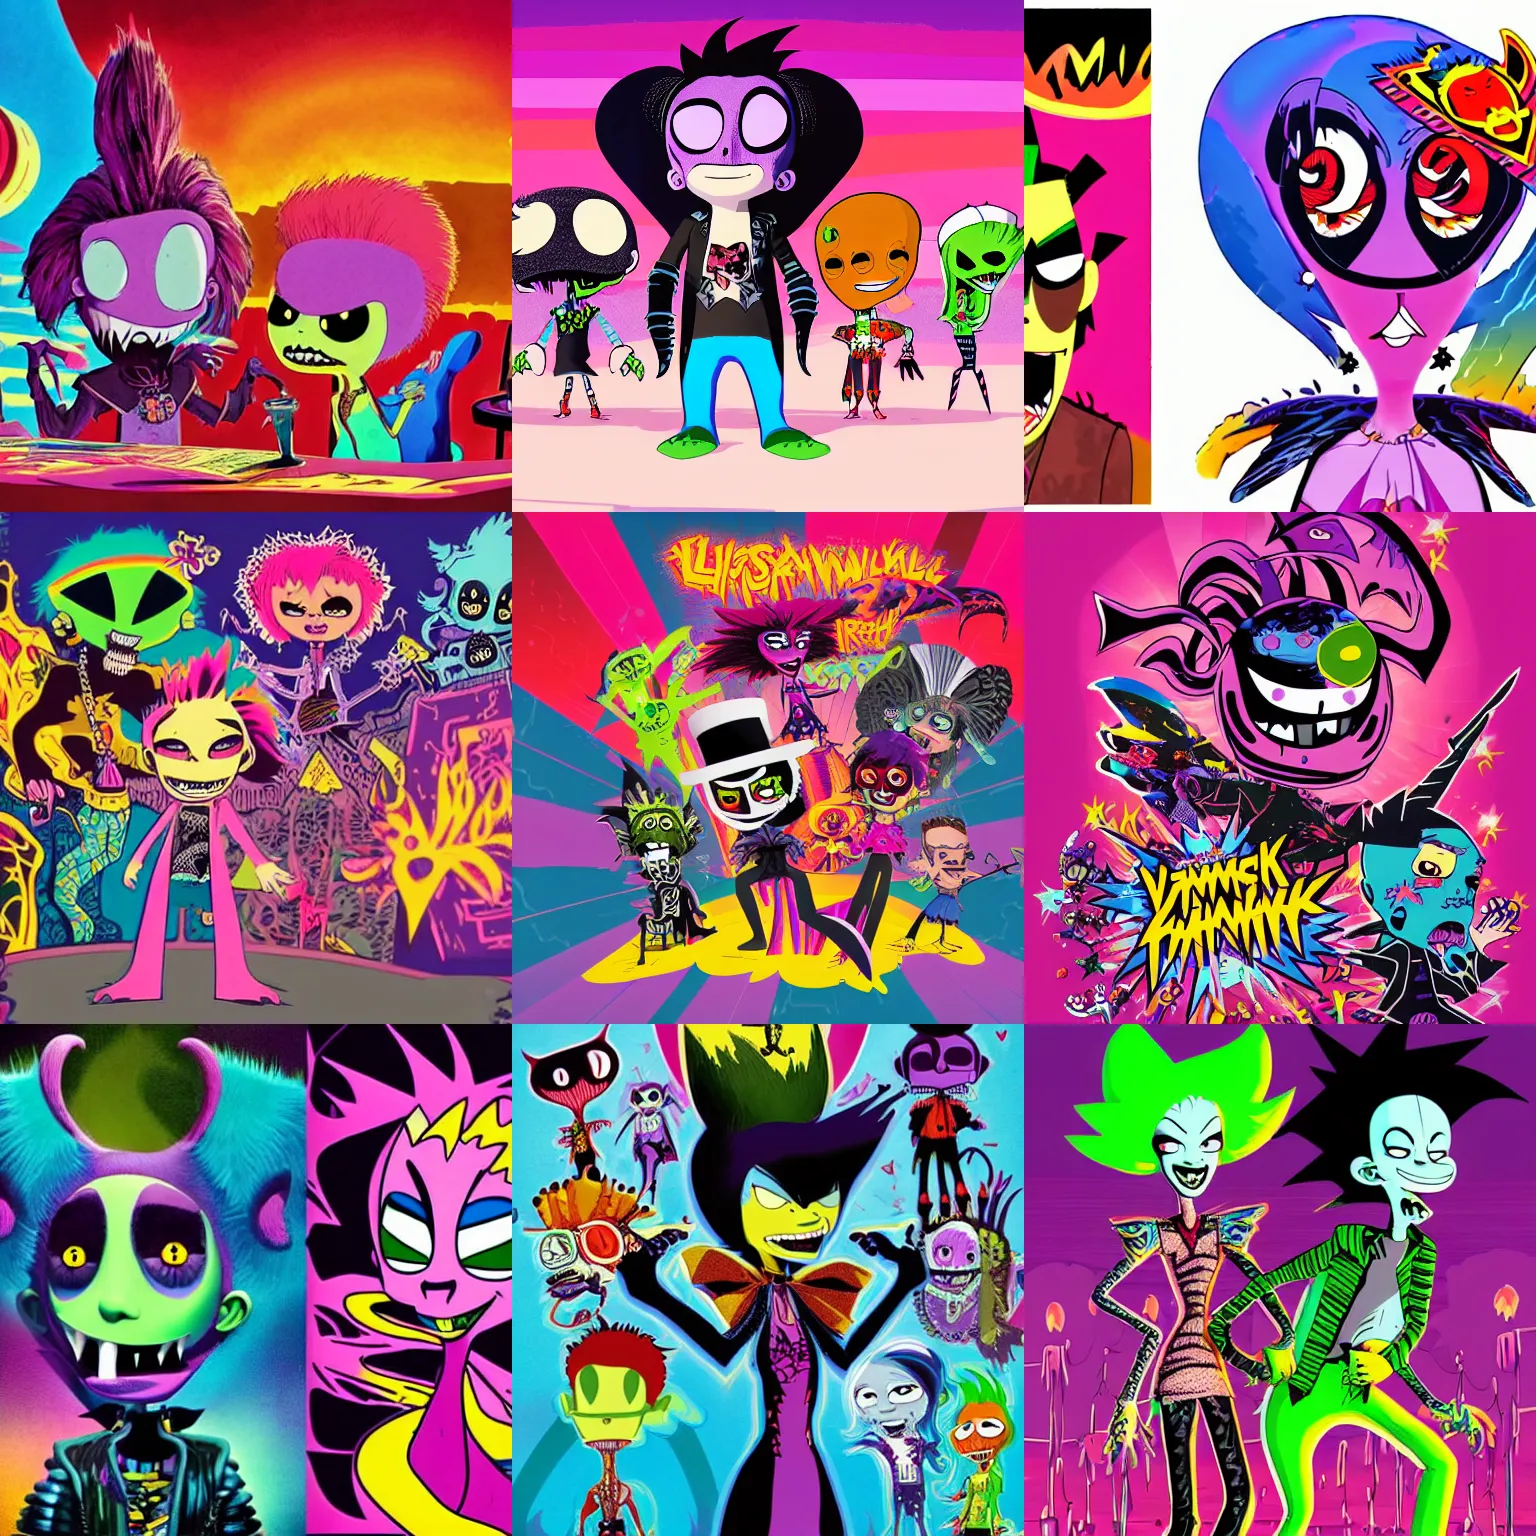 Prompt: lisa frank punk rocker vampiric electrifying rockstar vampire squid concept character designs of various shapes and sizes by genndy tartakovsky and rad sechrist and Jamie Hewlett from gorrilaz and tim shafer from double fine for the new hotel transylvania film